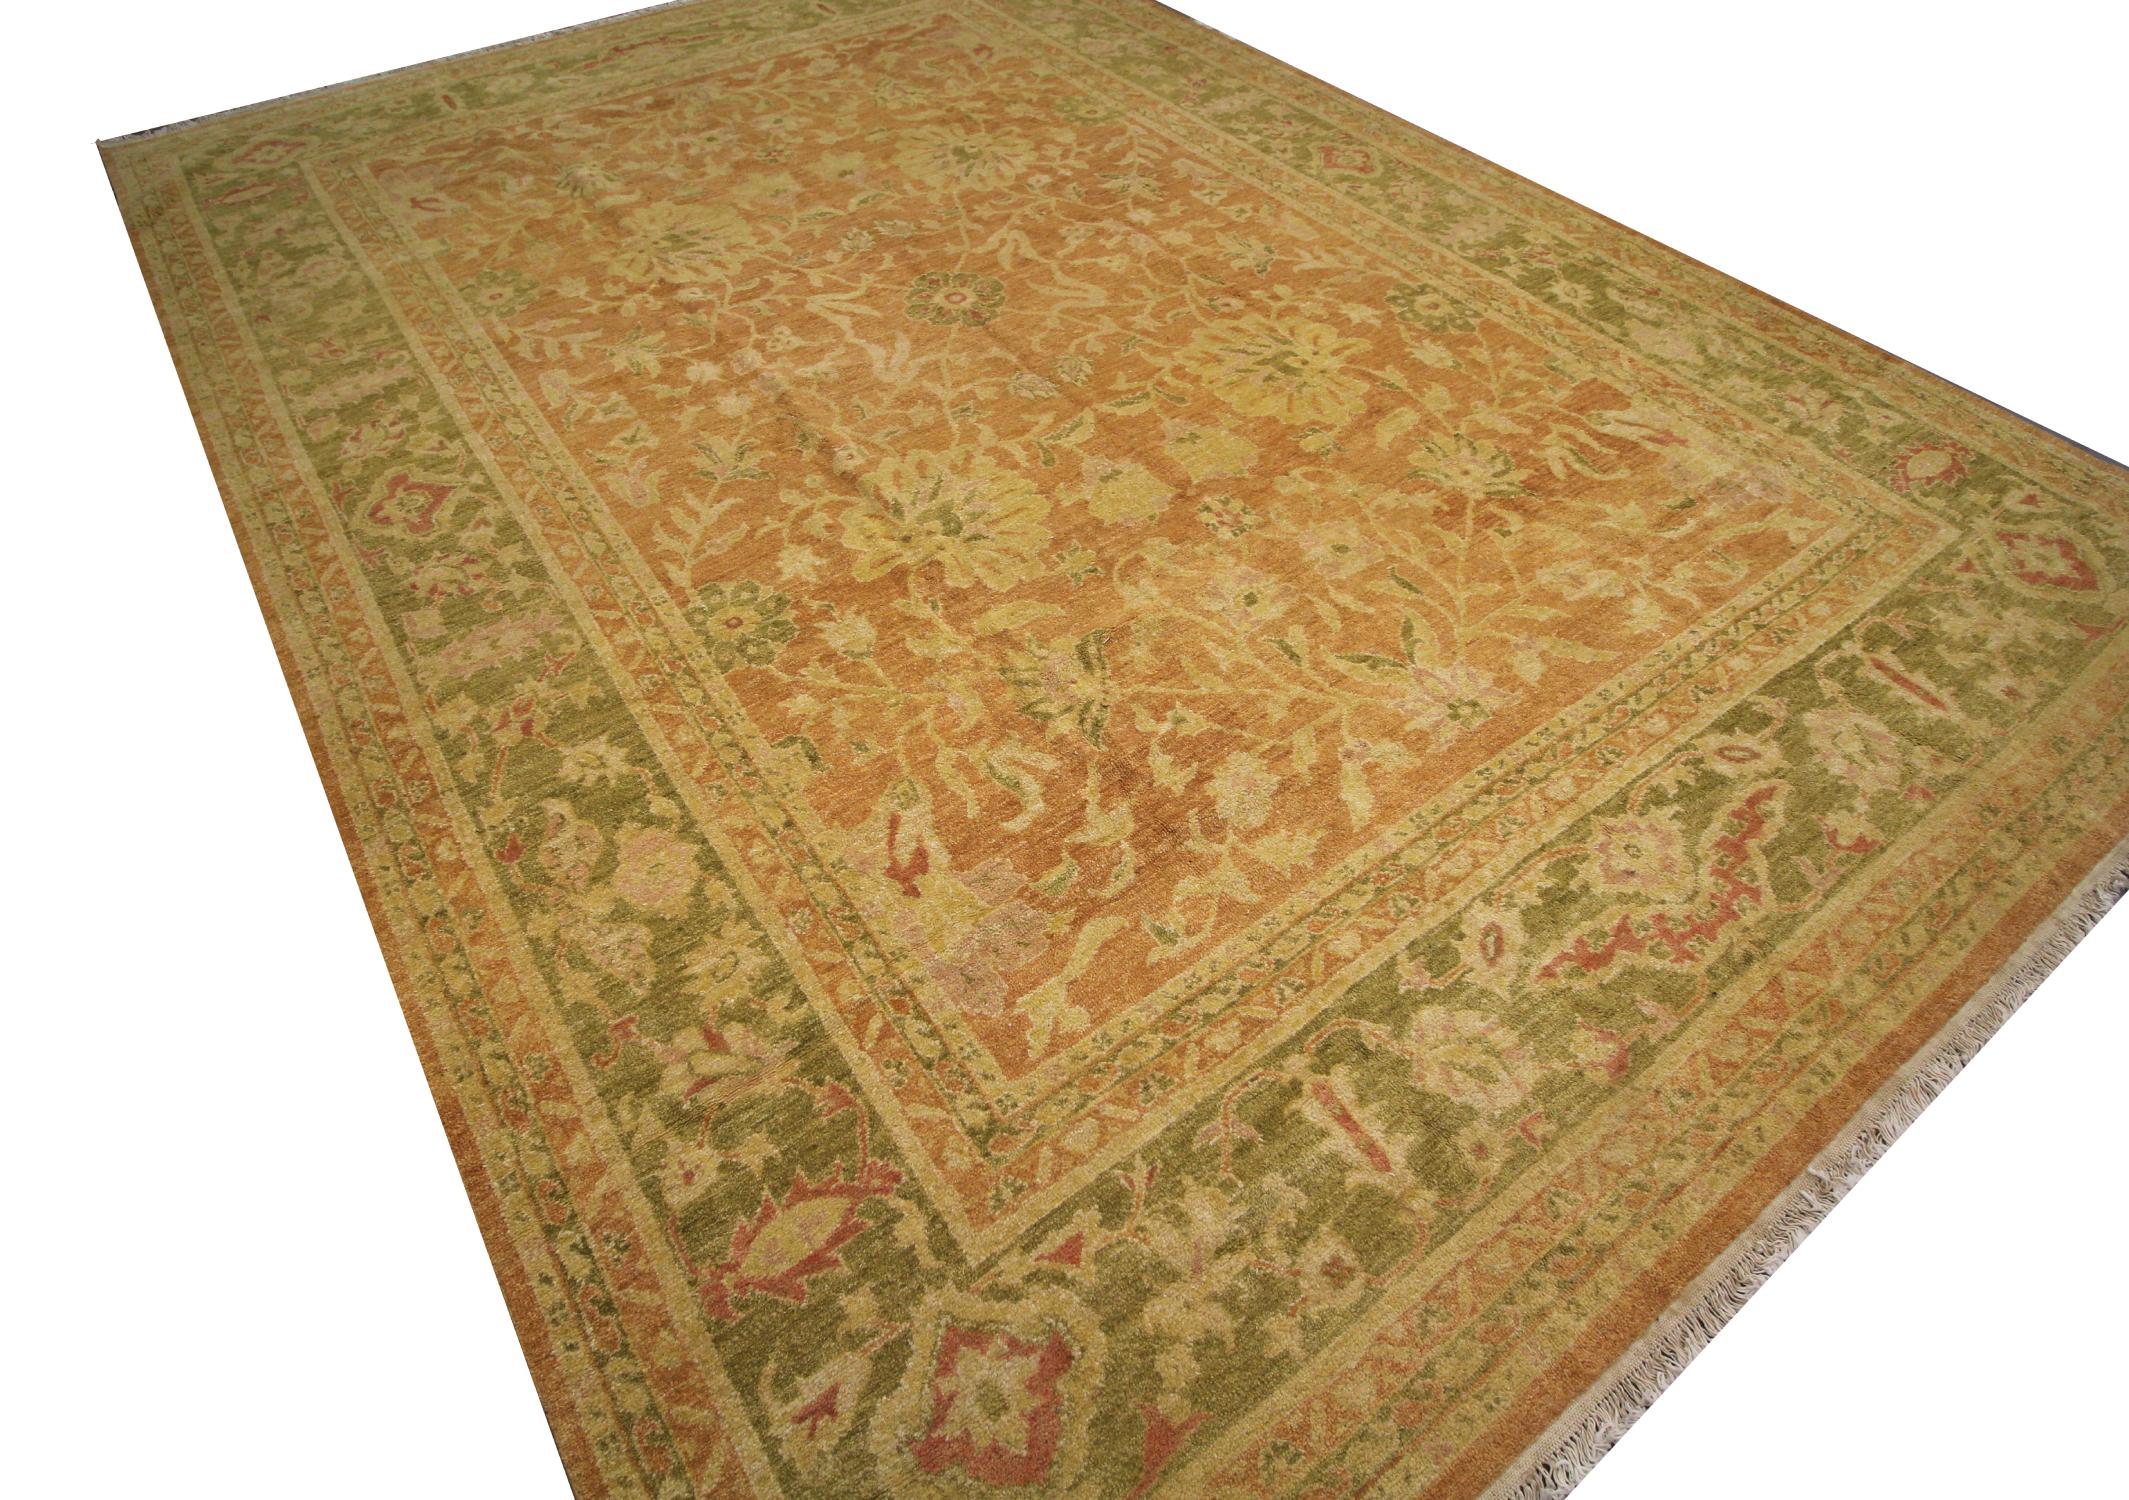 This bold over size wool area rug is a vintage Ziegler style Indian rug woven by hand in the 1990s. The floral design is a traditional Ziegler style woven on a rust-beige background with green and cream accents. The symmetrical floral pattern and